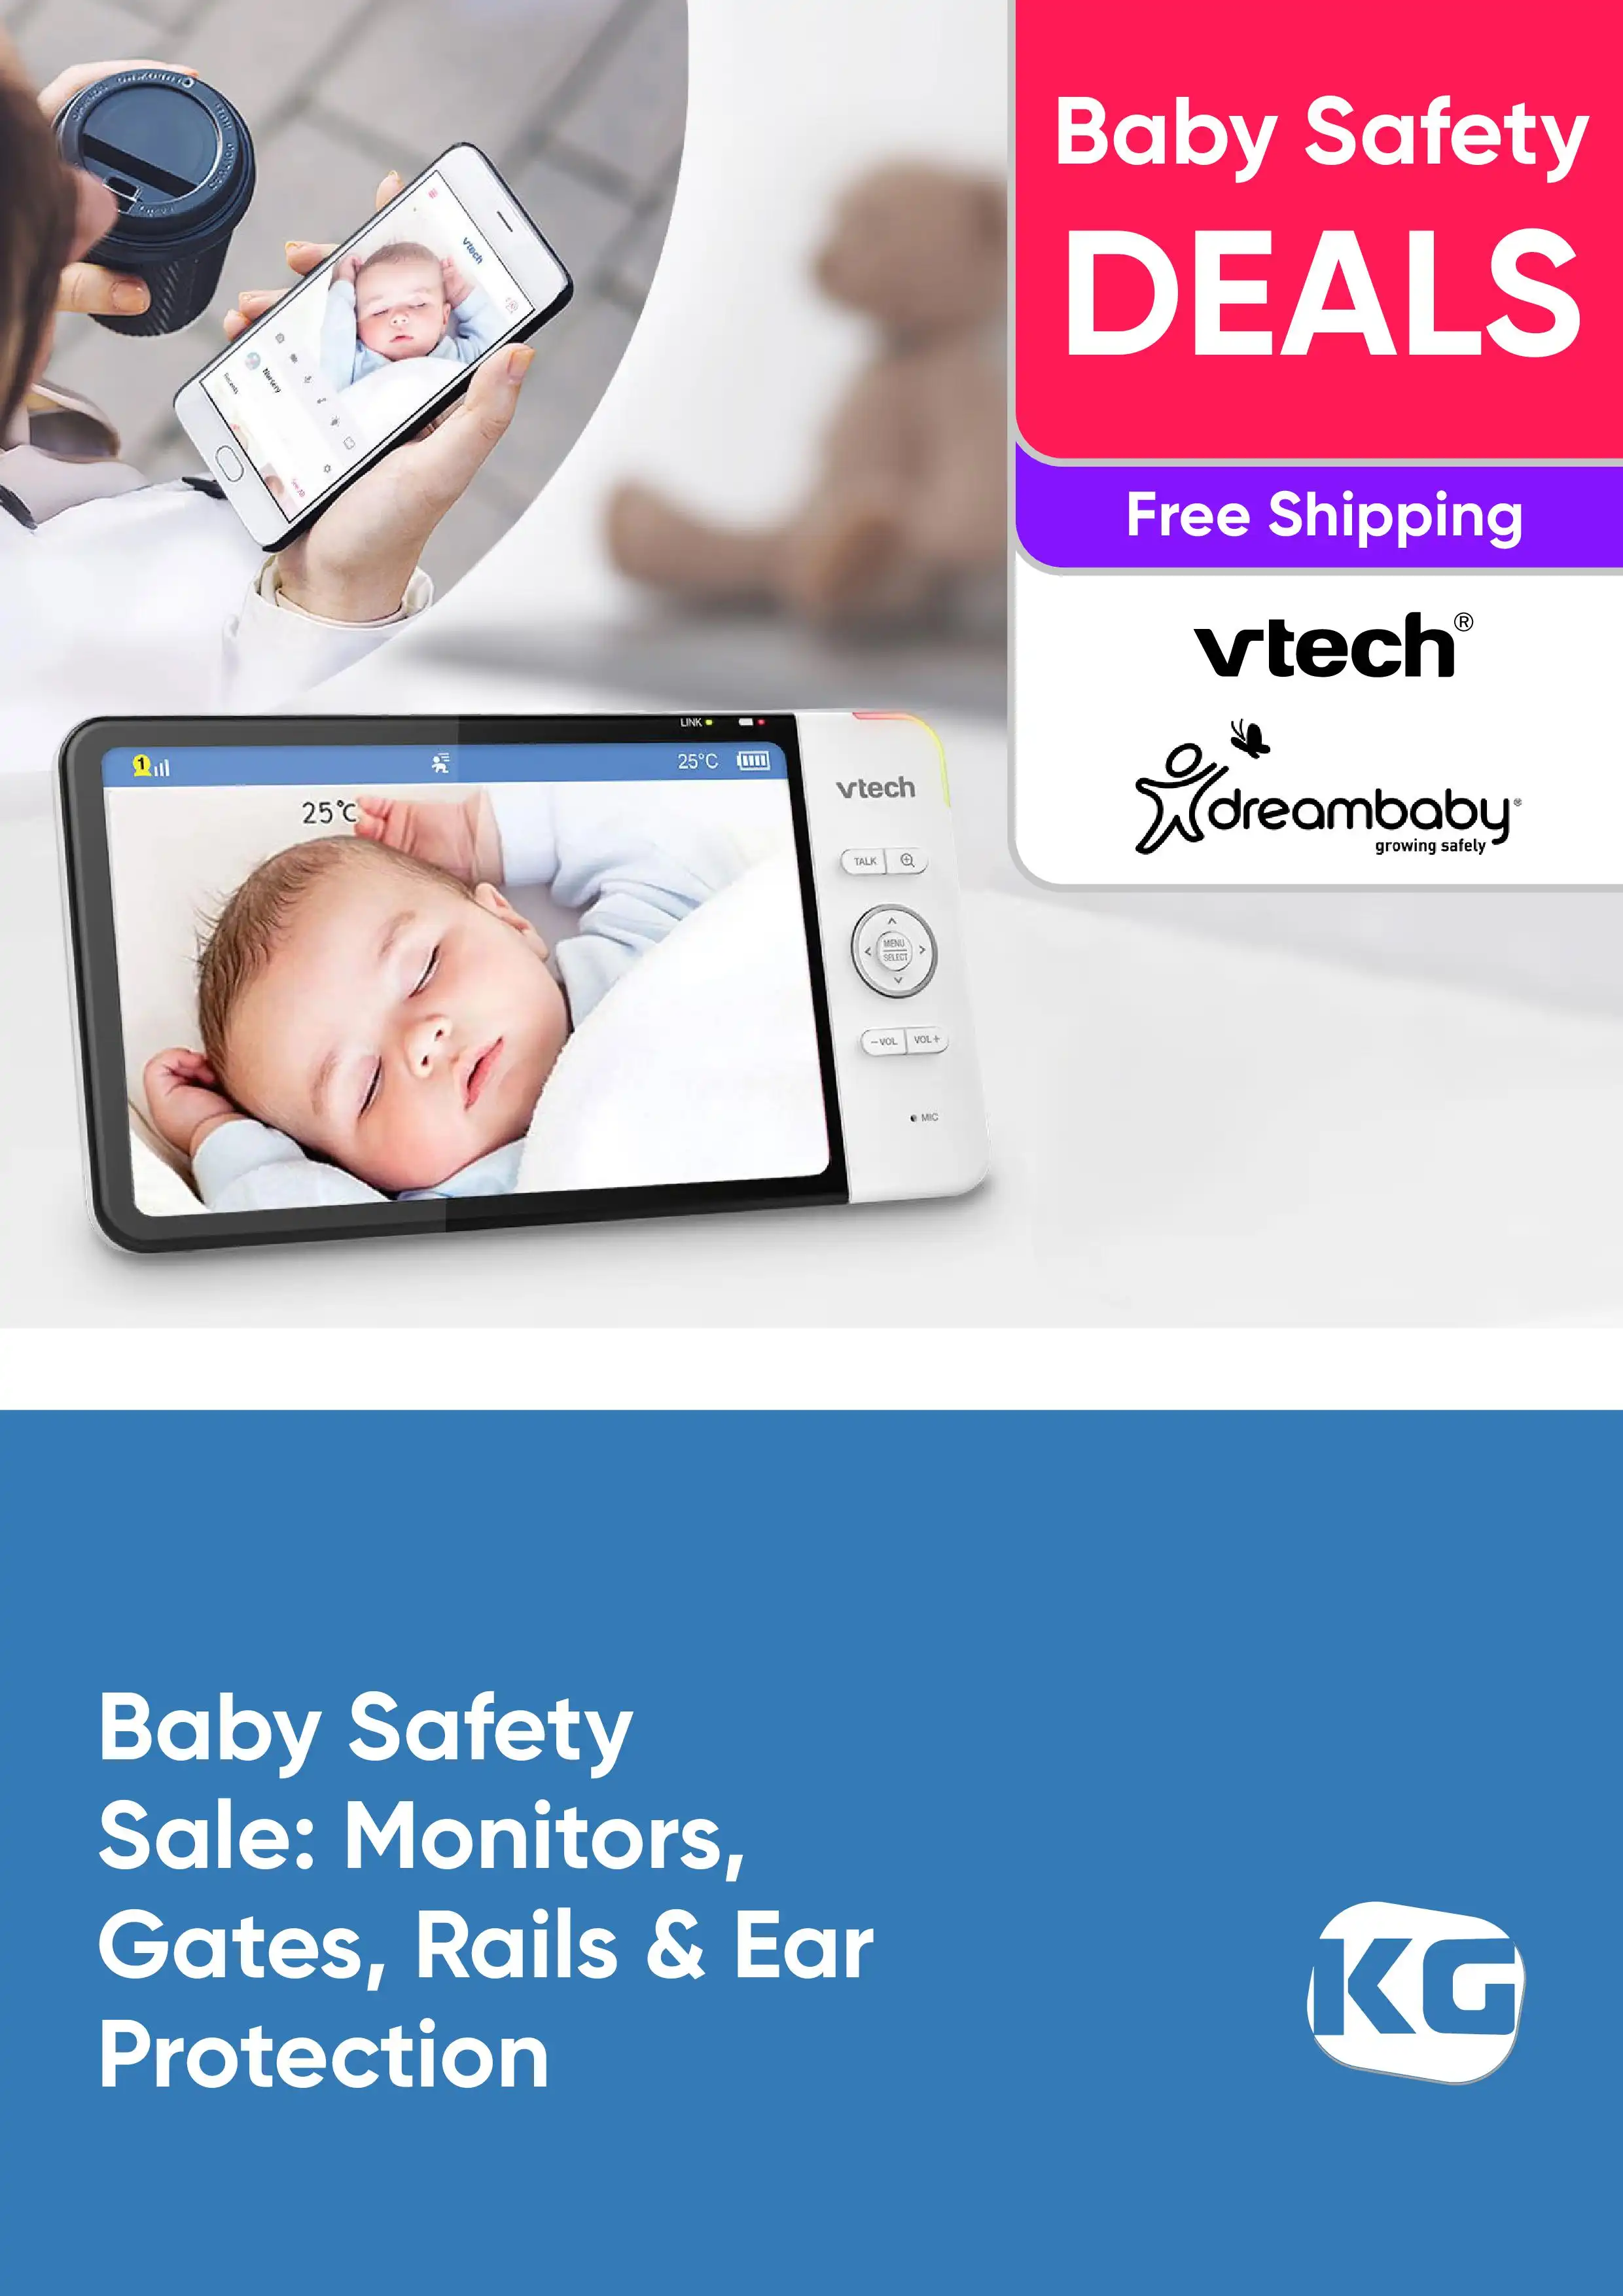 Baby Safety Sale - Monitors, Gates, Rails and Ear Protection - VTech, dreambaby